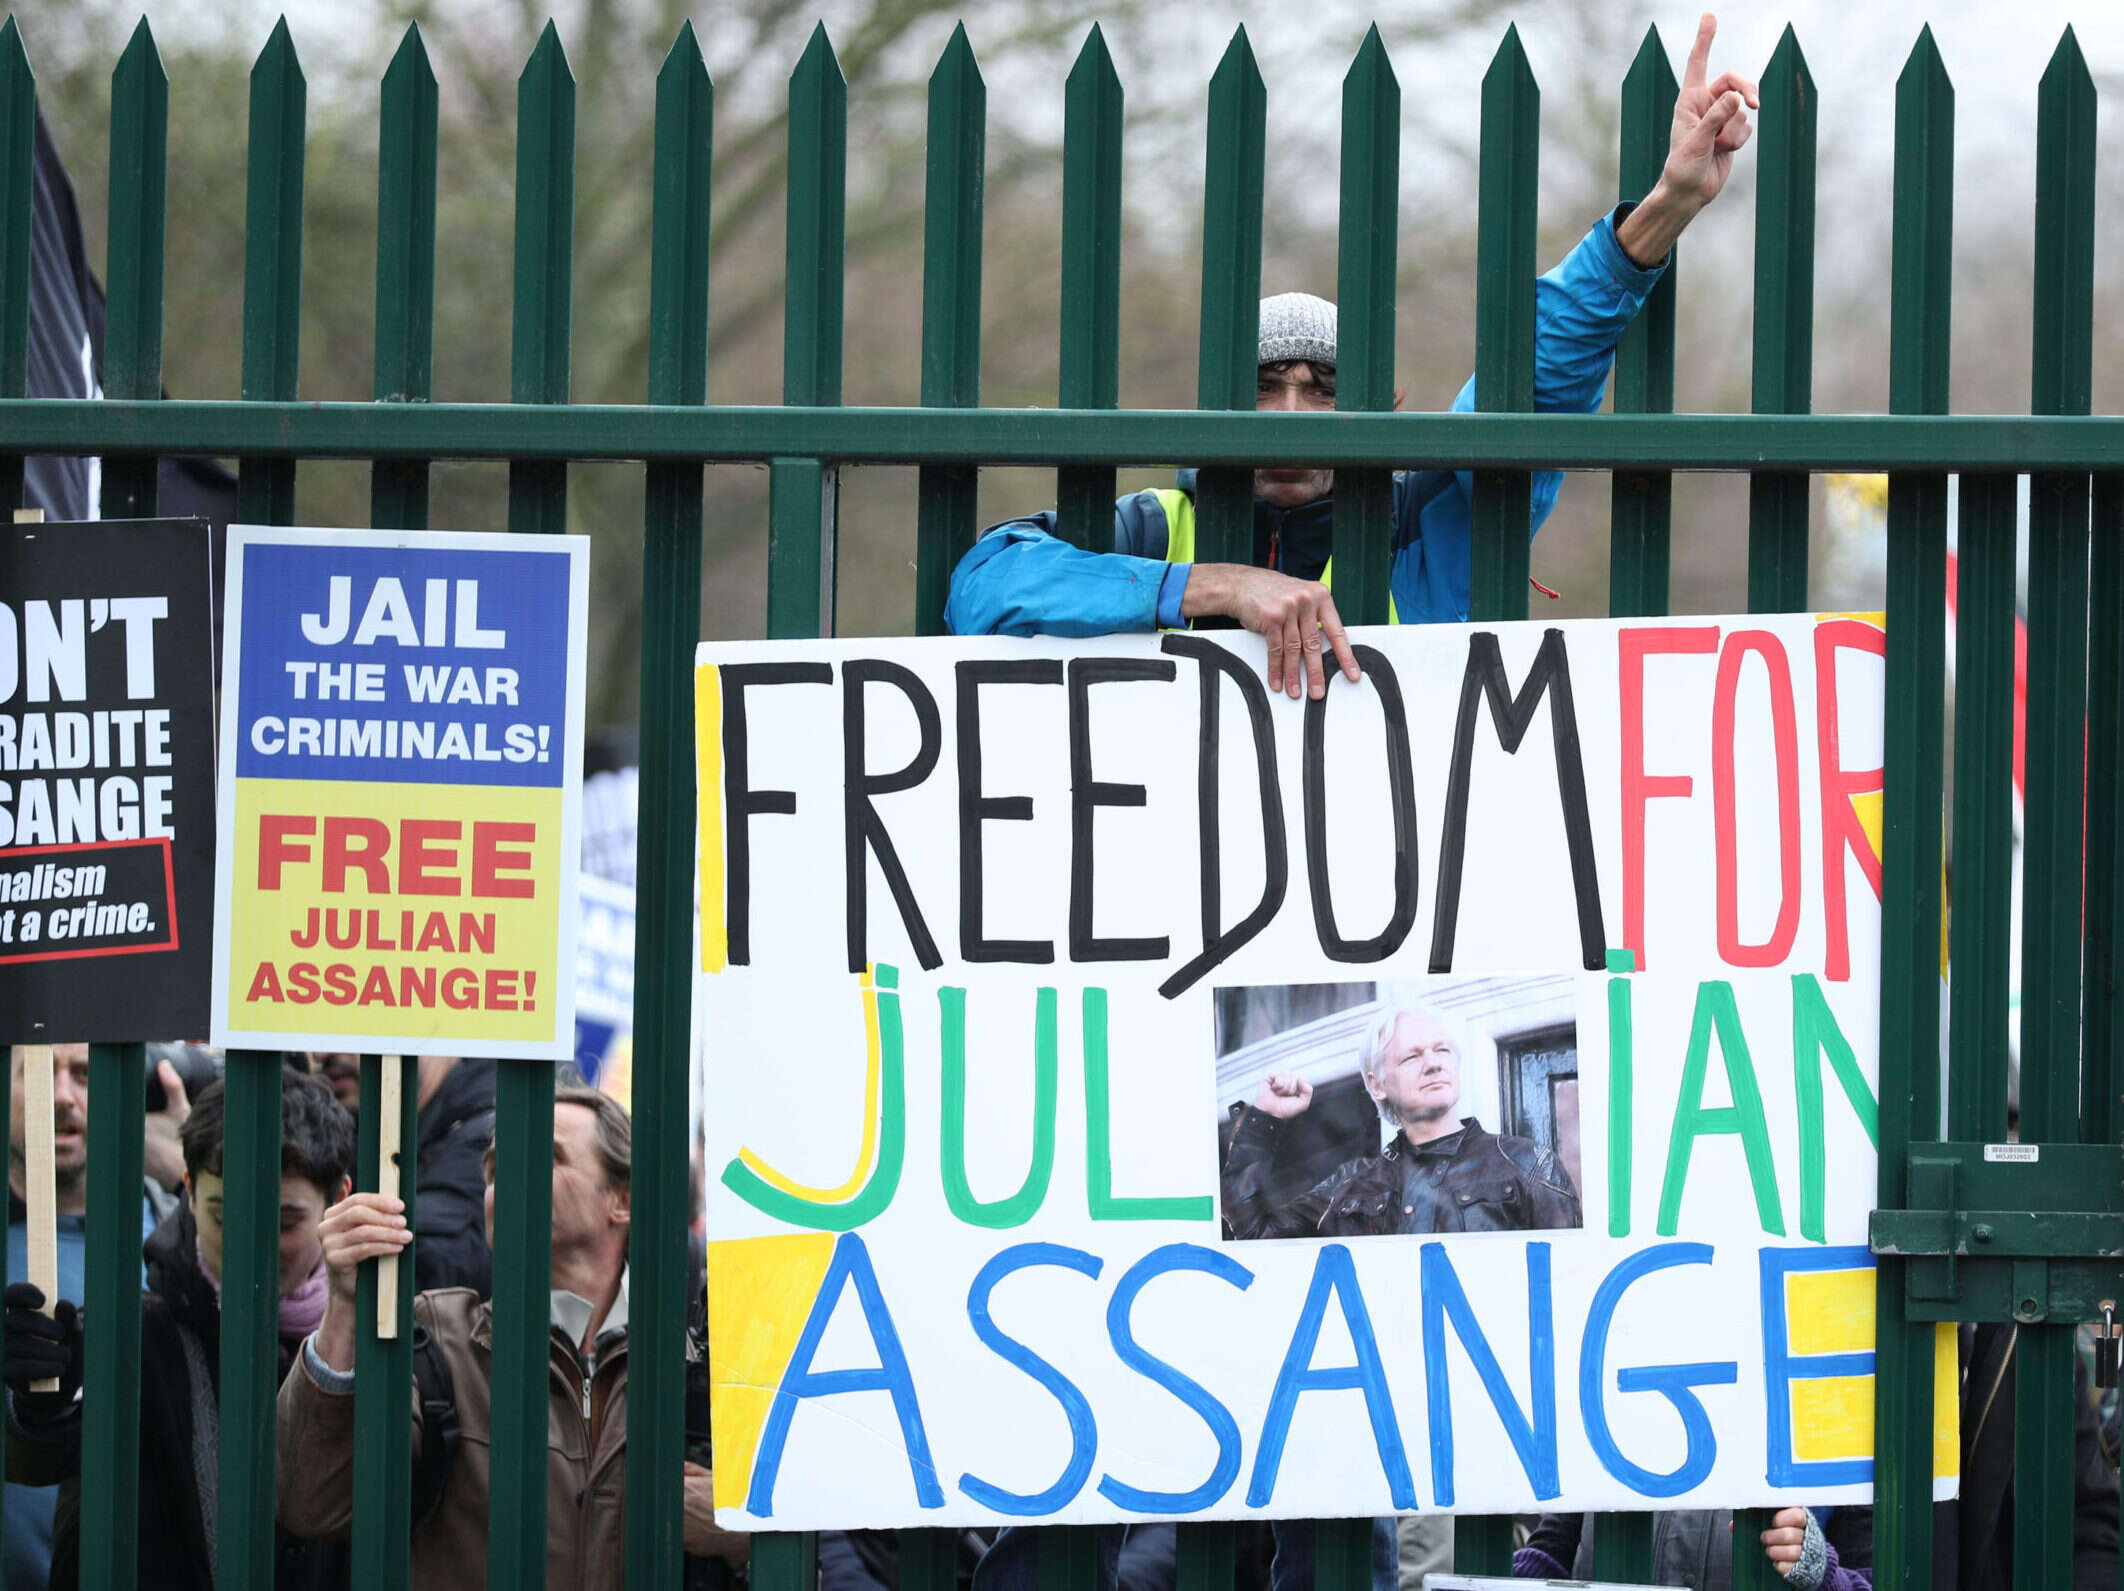 Julian Assange extradition: Guardian to blame for publication of unredacted cables, court told